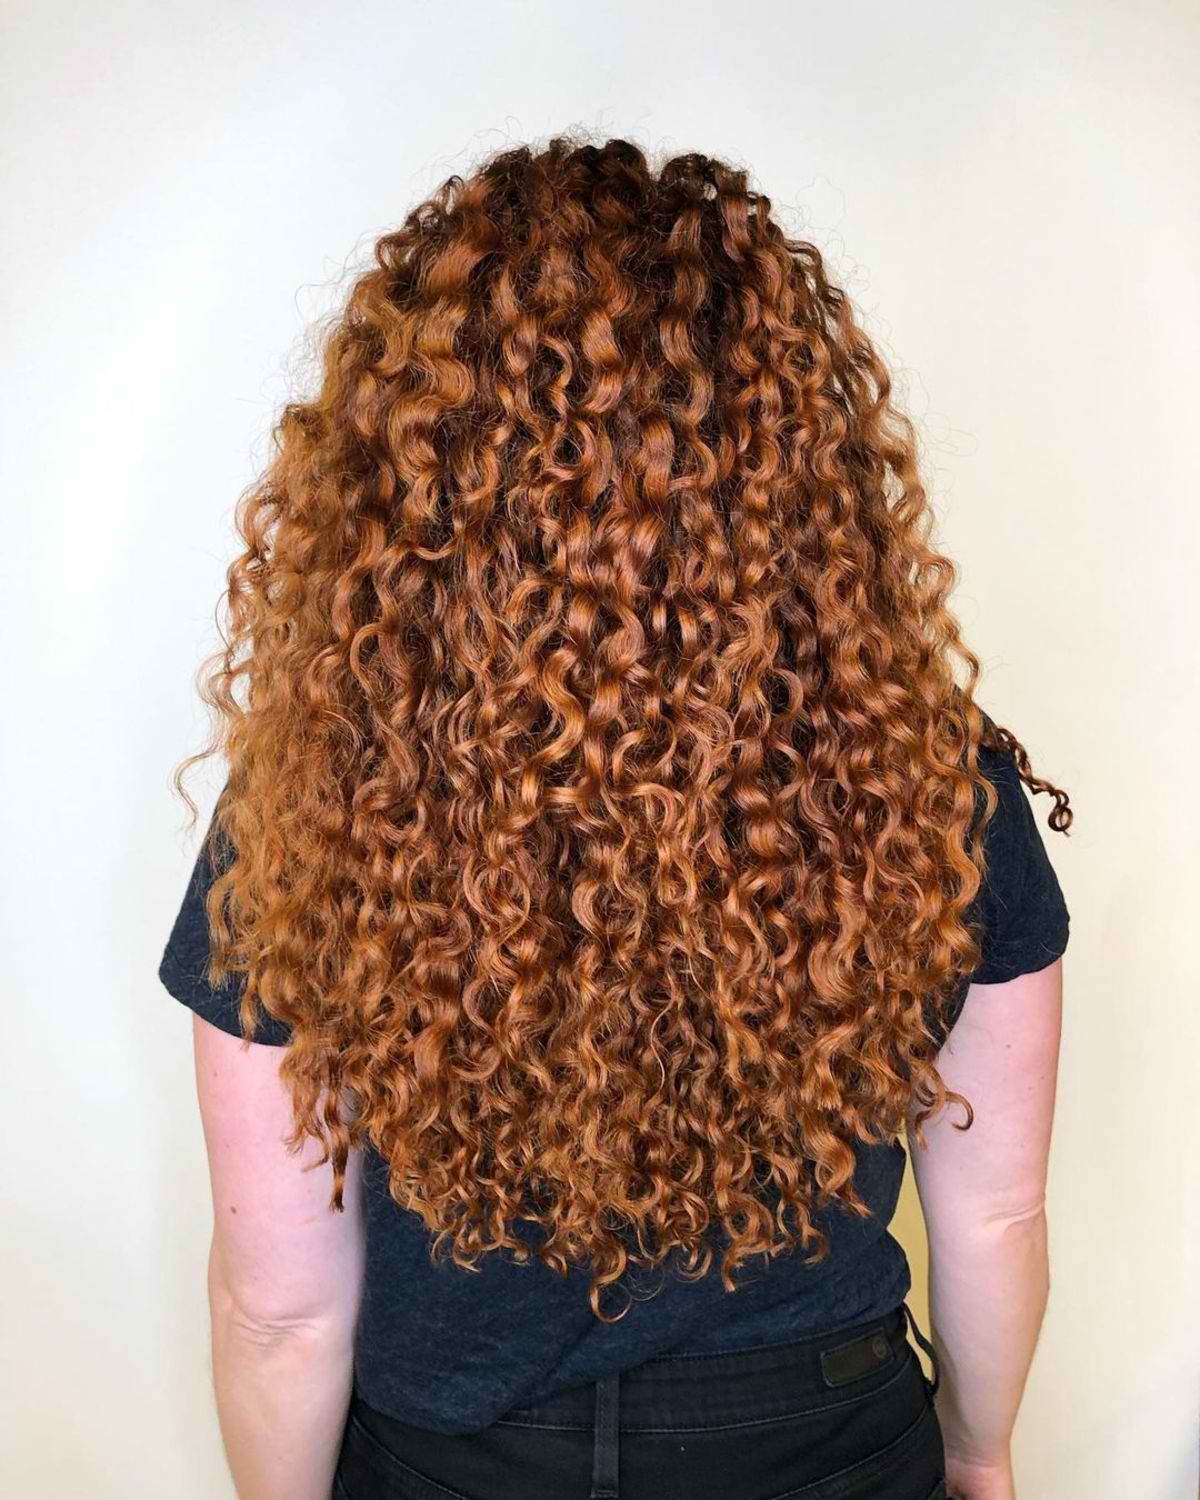 Natural spiral curls for long hair